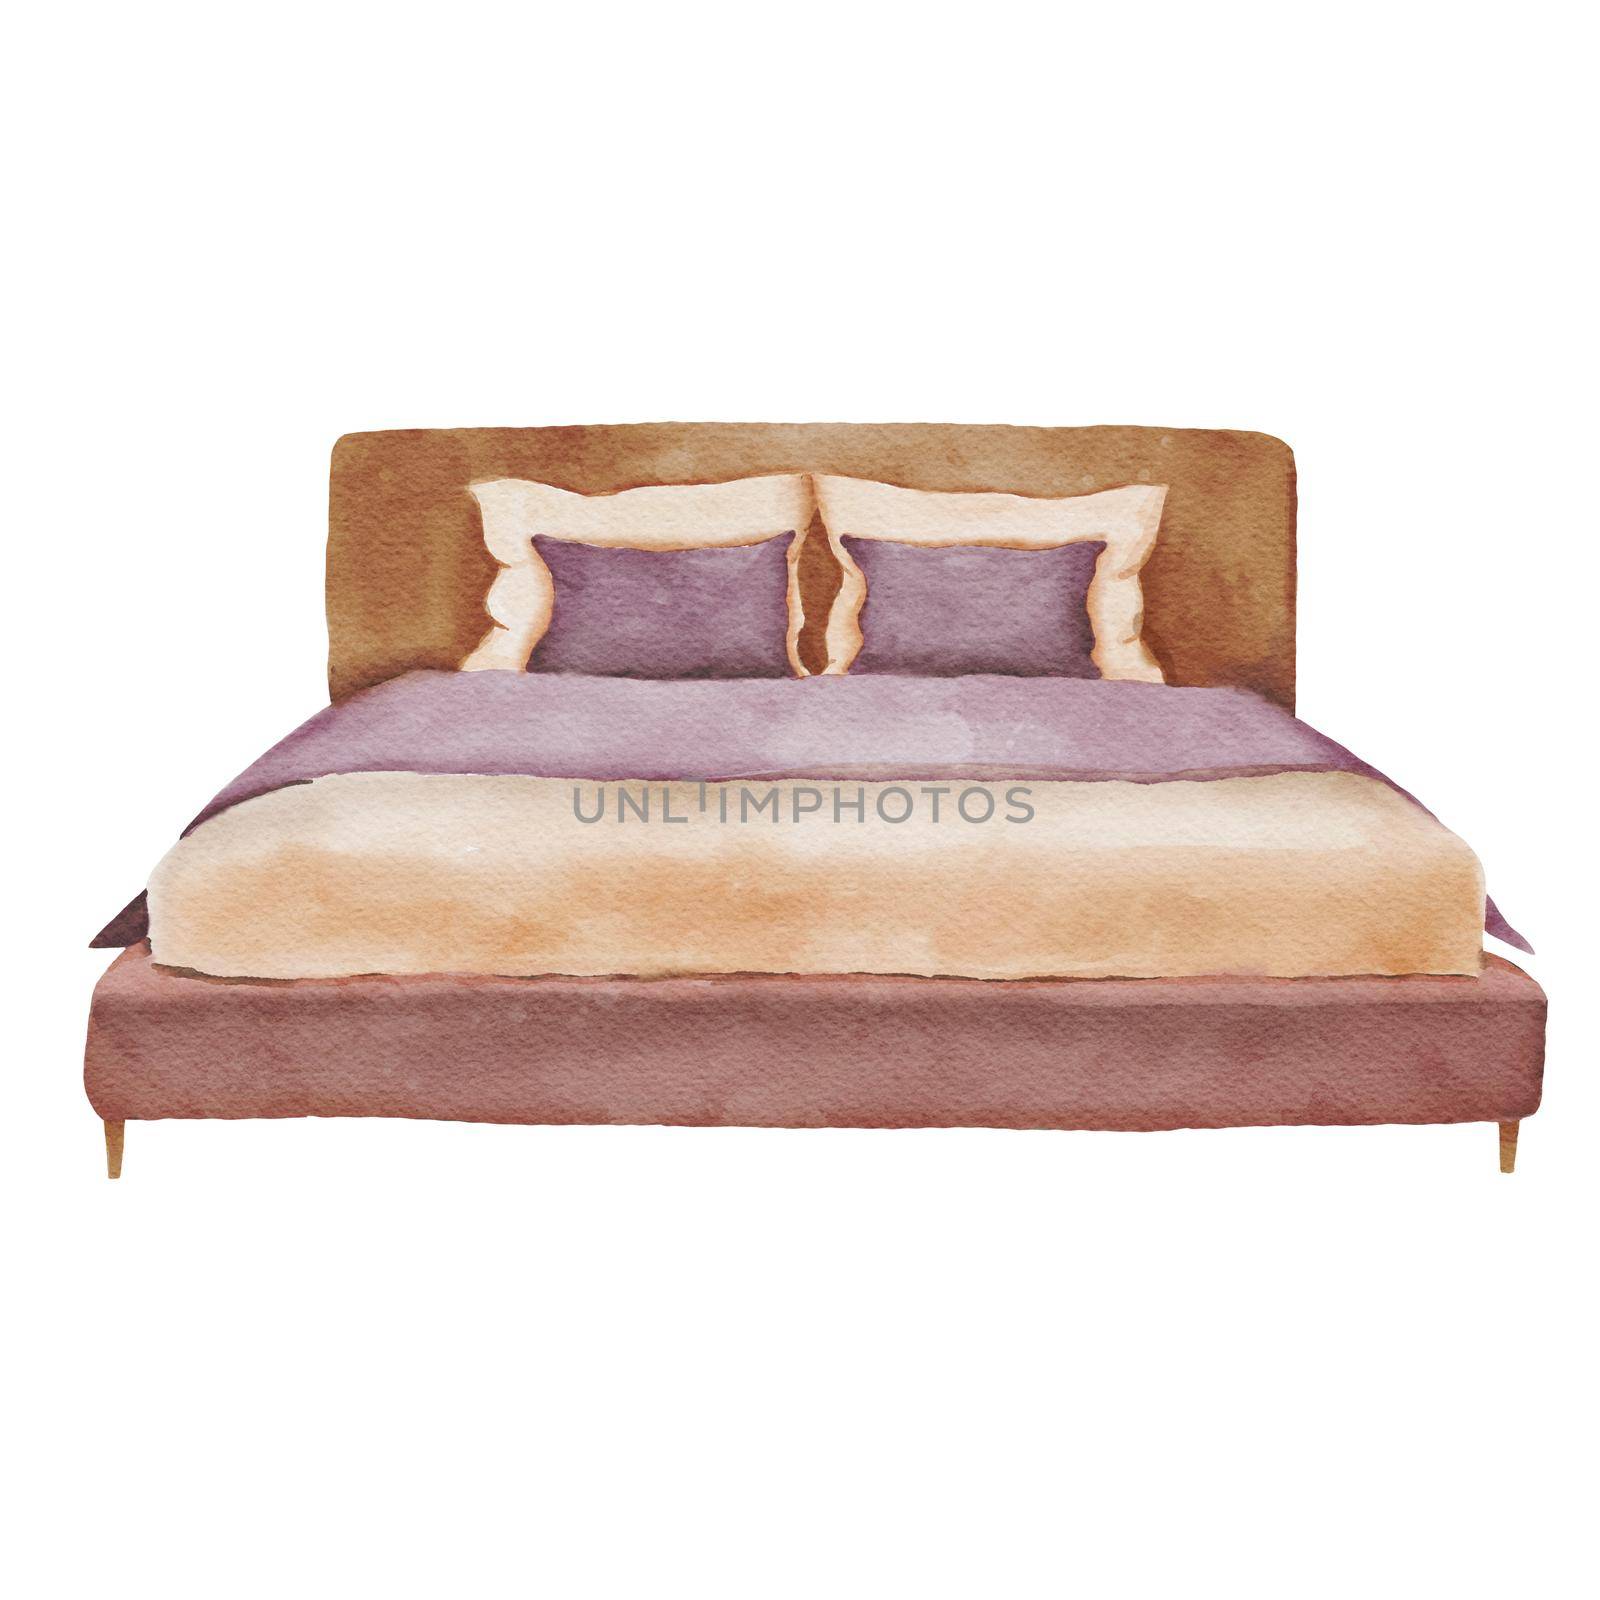 Watercolor hand painted bed. Furniture illustration isolated on white background by ElenaPlatova